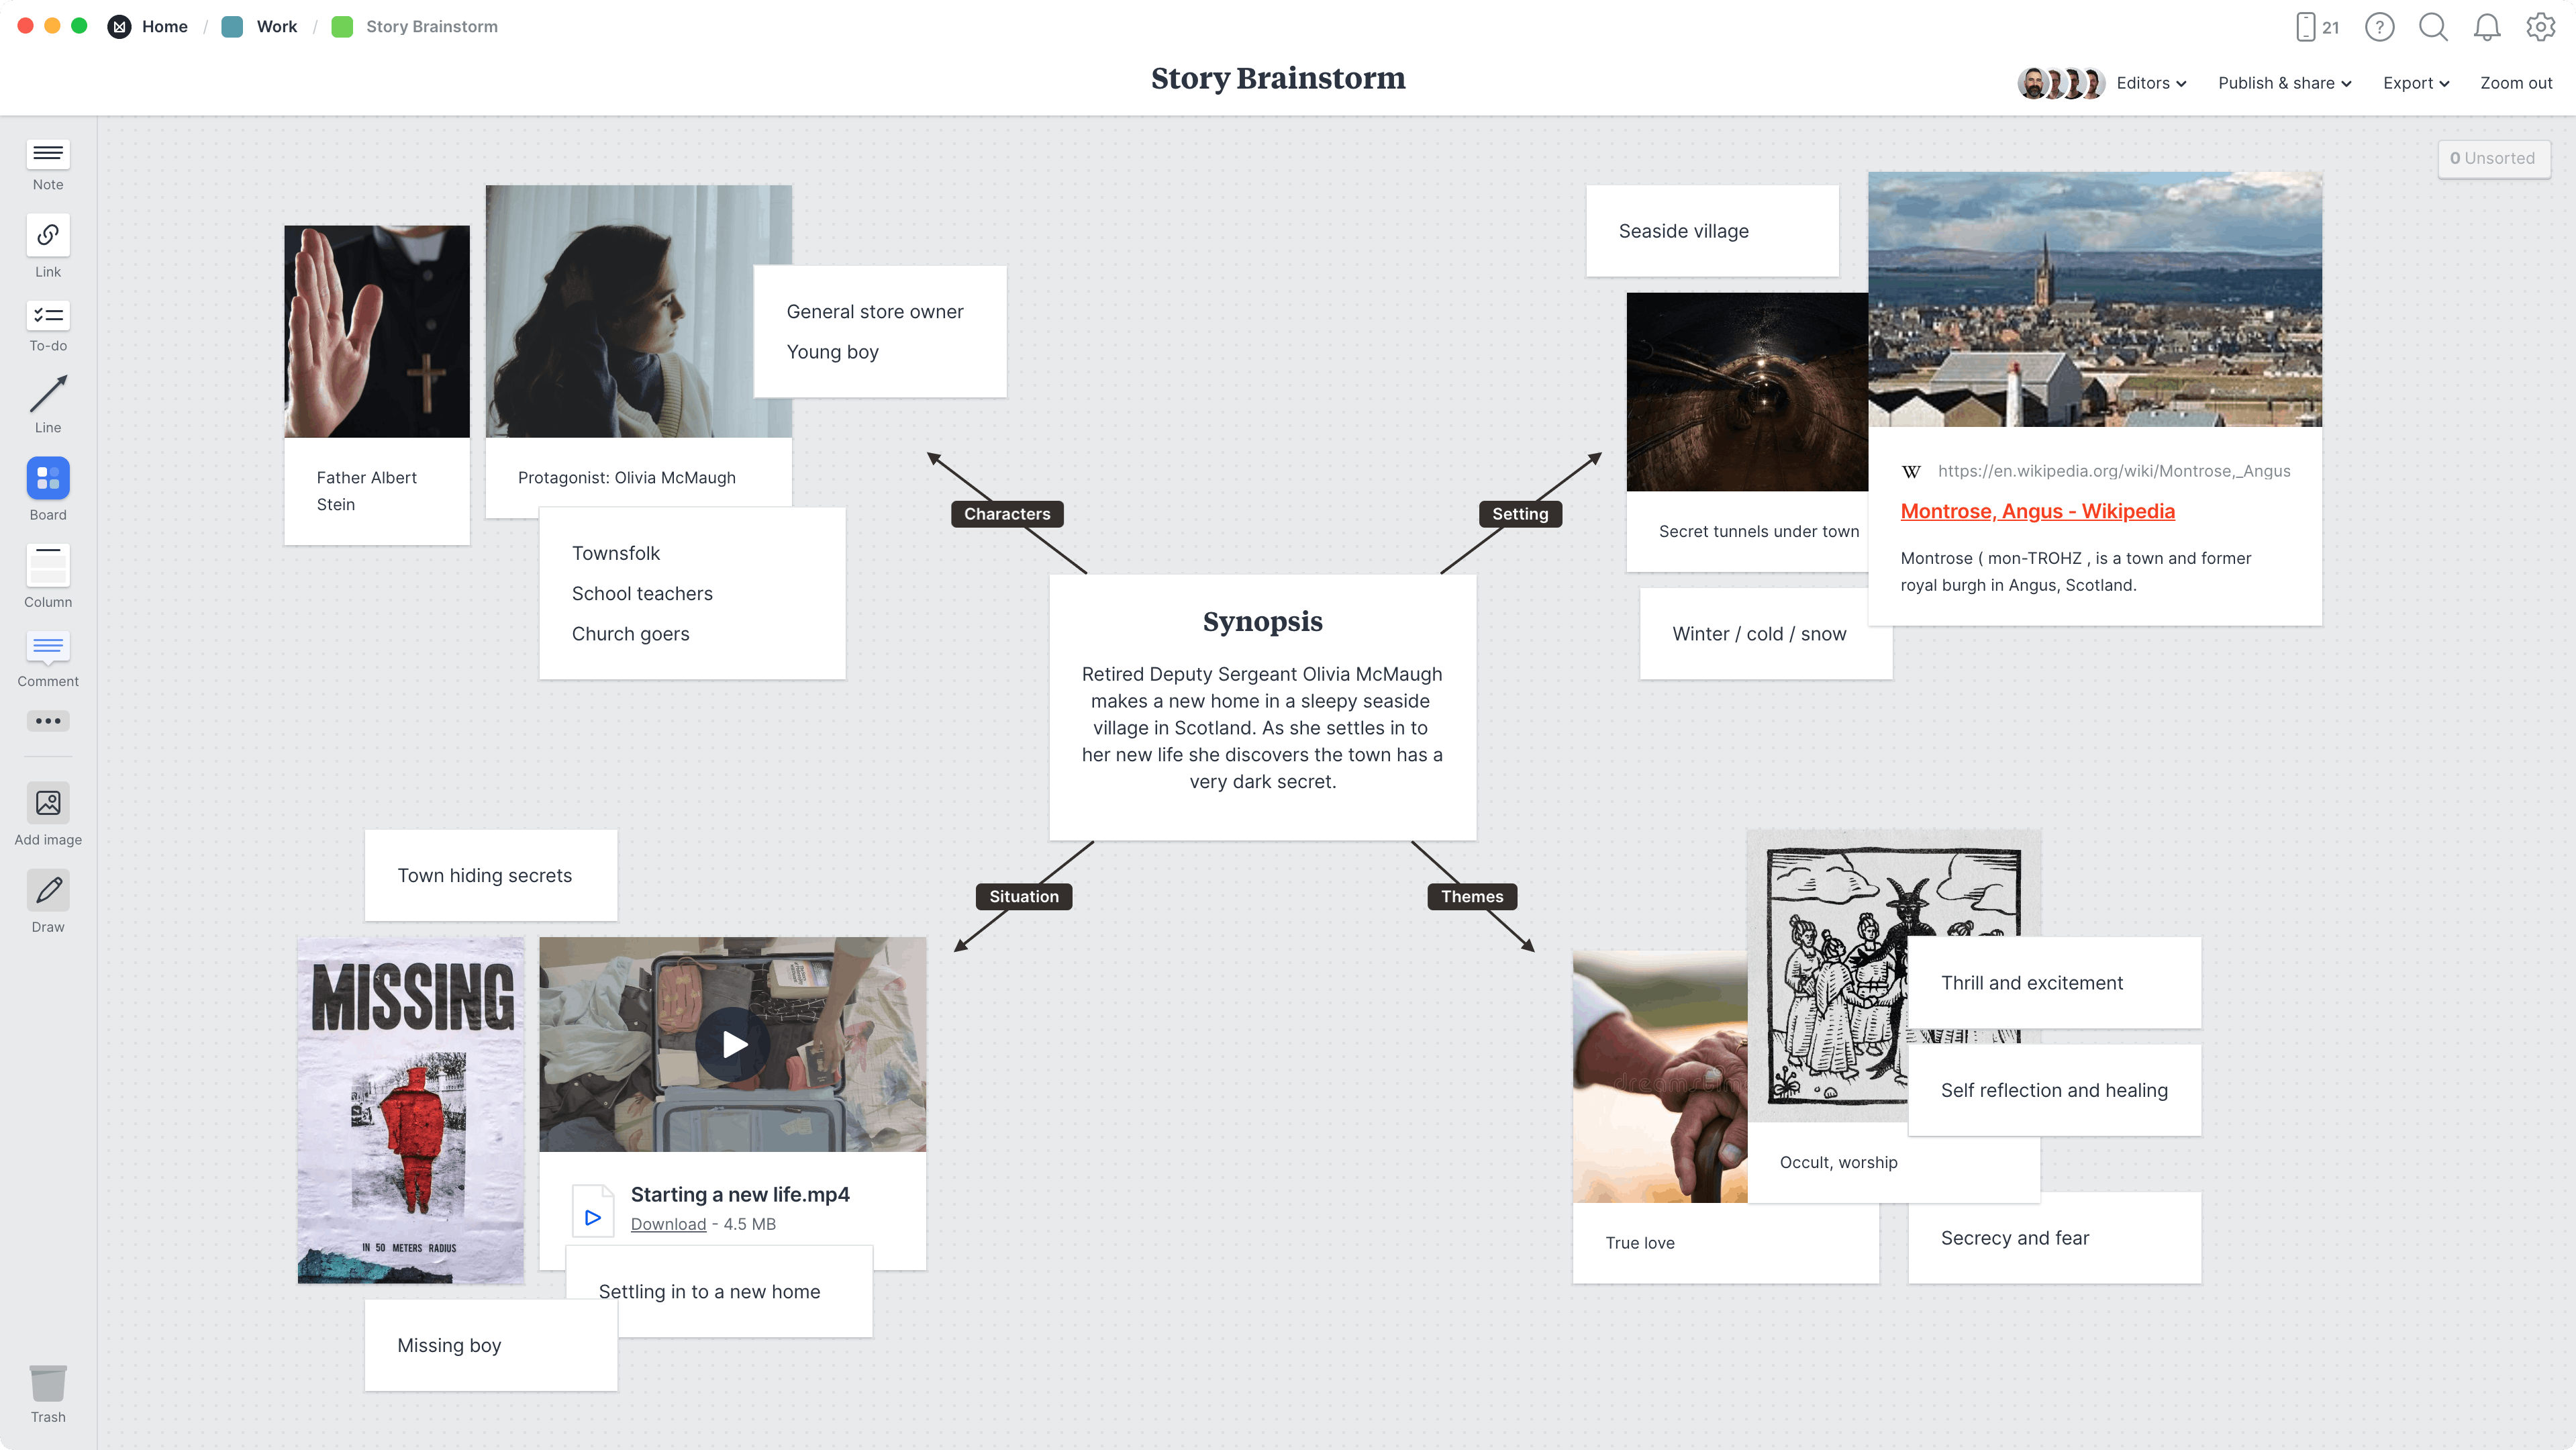 Brainstorming Template, within the Milanote app